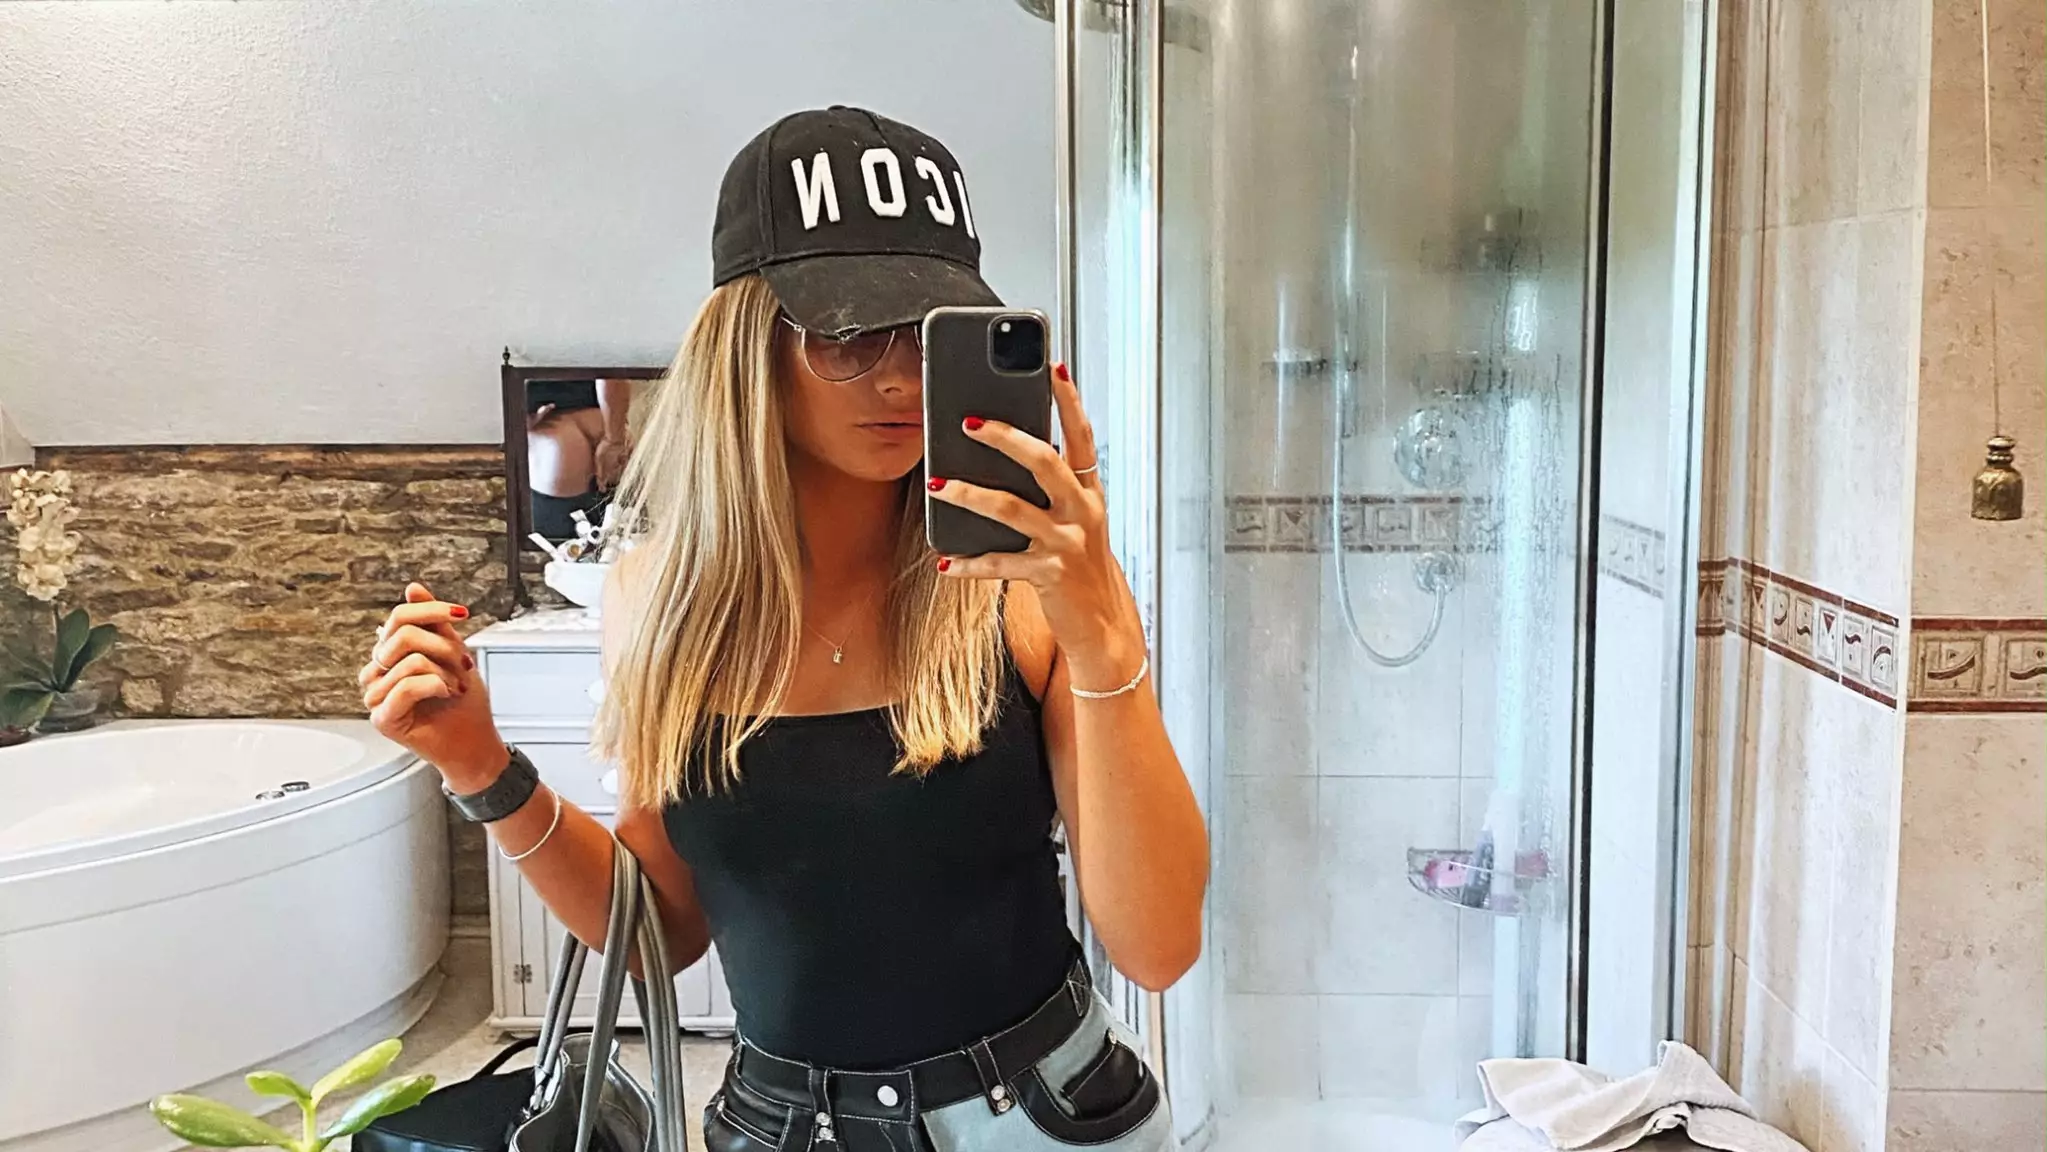 Woman Shares Selfie But Doesn't Spot Boyfriend Wiping His Bum In The Background